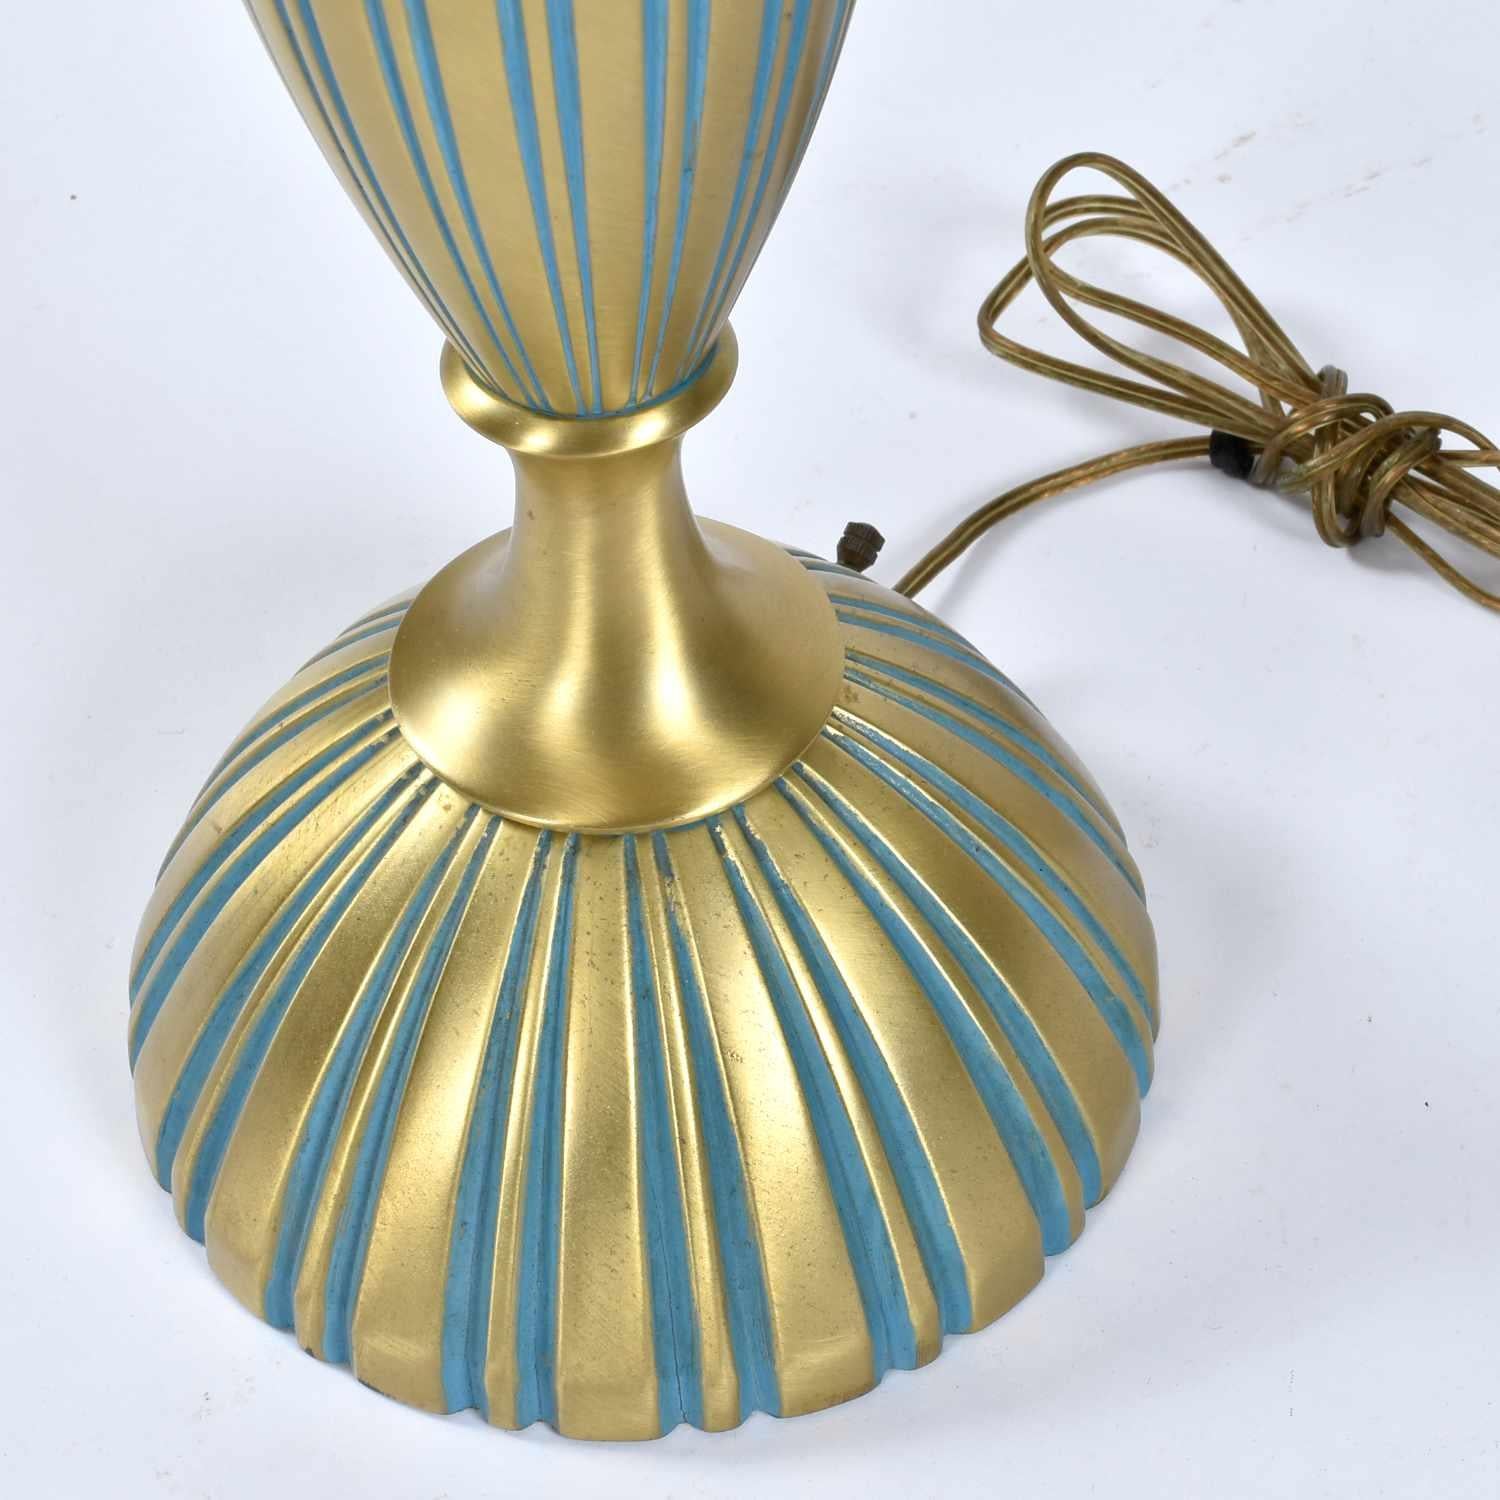 Rembrandt Teal and Gold Hourglass Shaped Midcentury Table Lamp For Sale 7